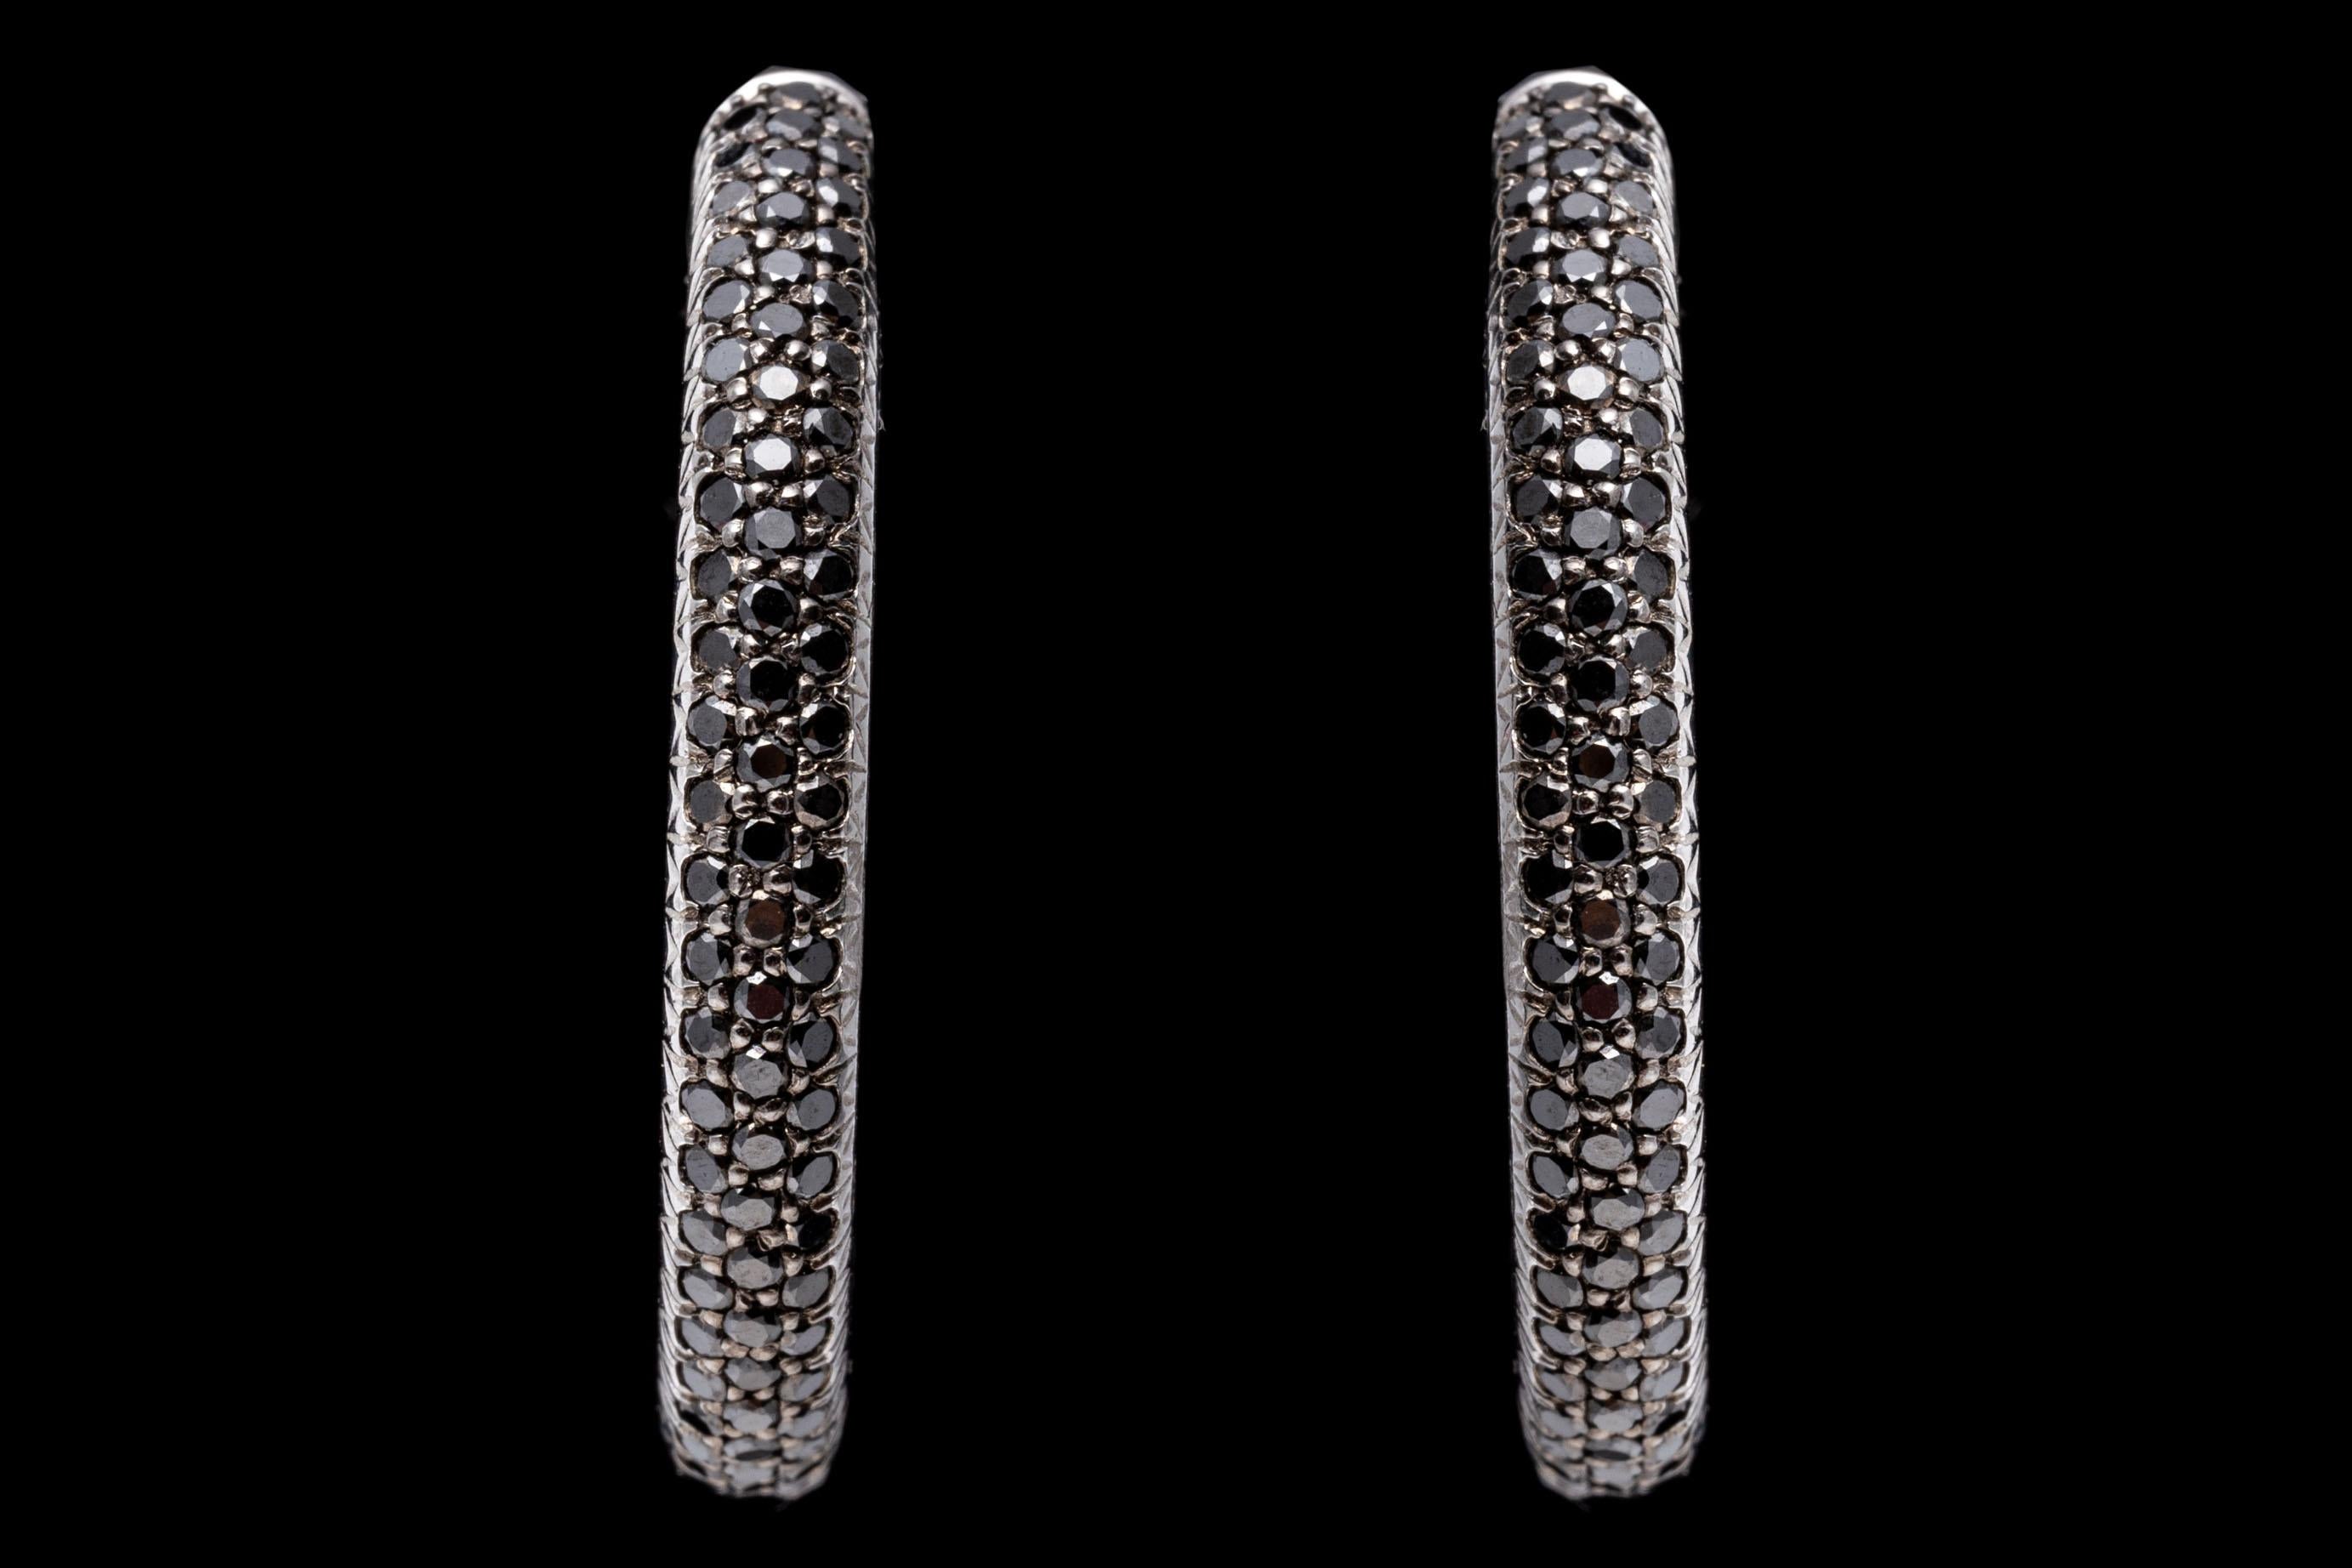 14k White Gold Stunning Pave Set Black Diamond Round Hoop Earrings, 2.85 TCW For Sale 3